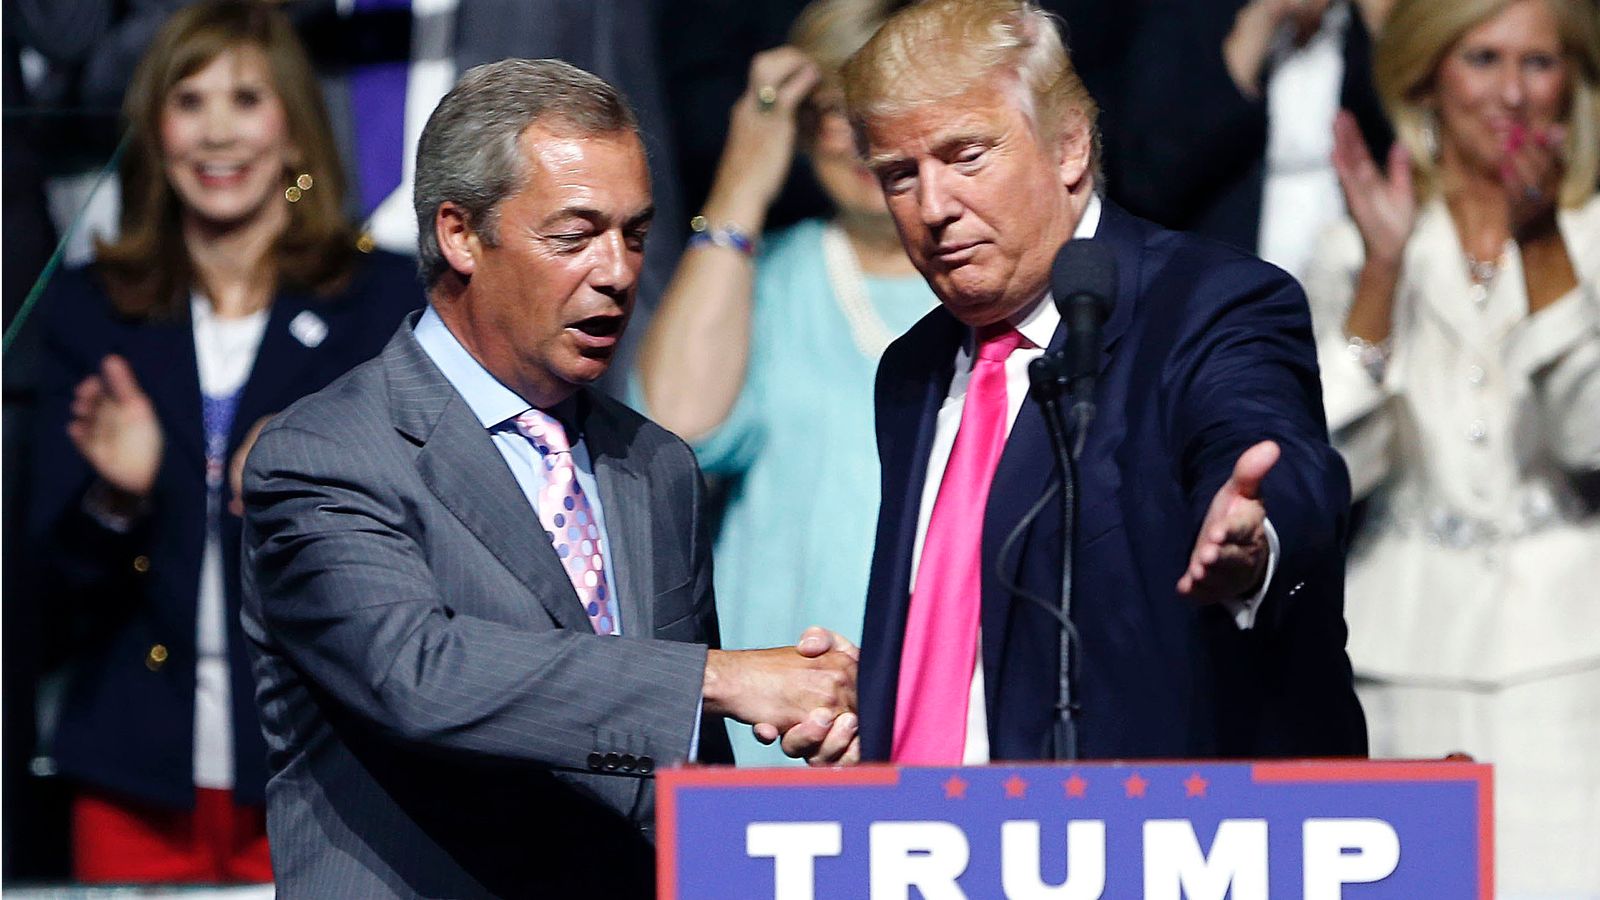 Nigel Farage claims Donald Trump 'learned a lot from me'